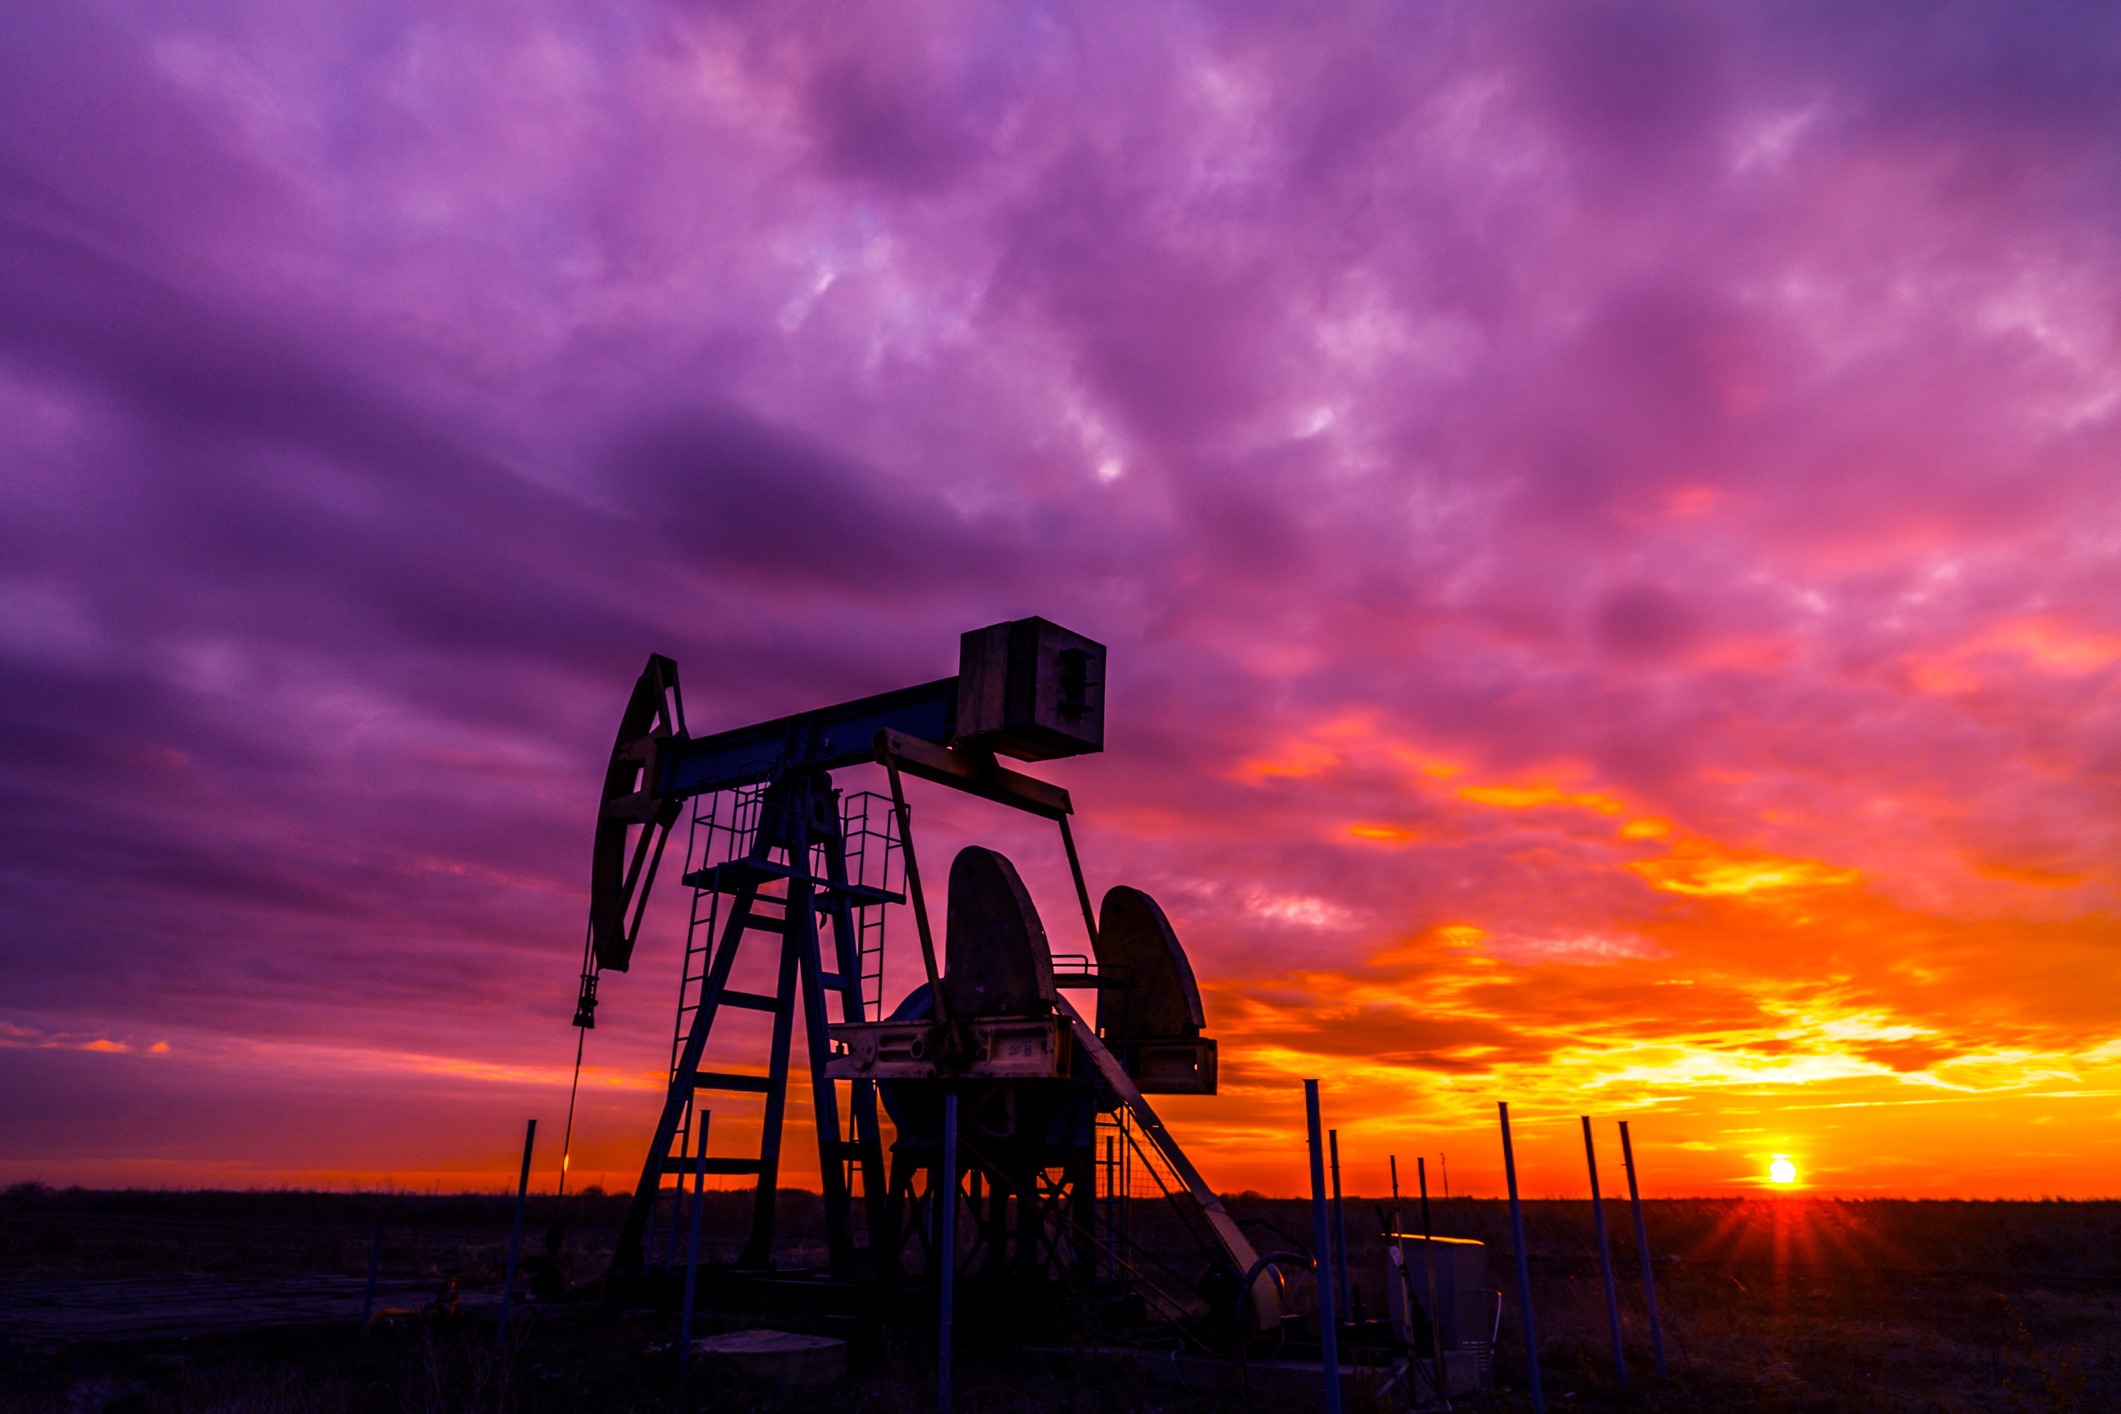 Scenery with oil and gas well pump and dramatic sunset